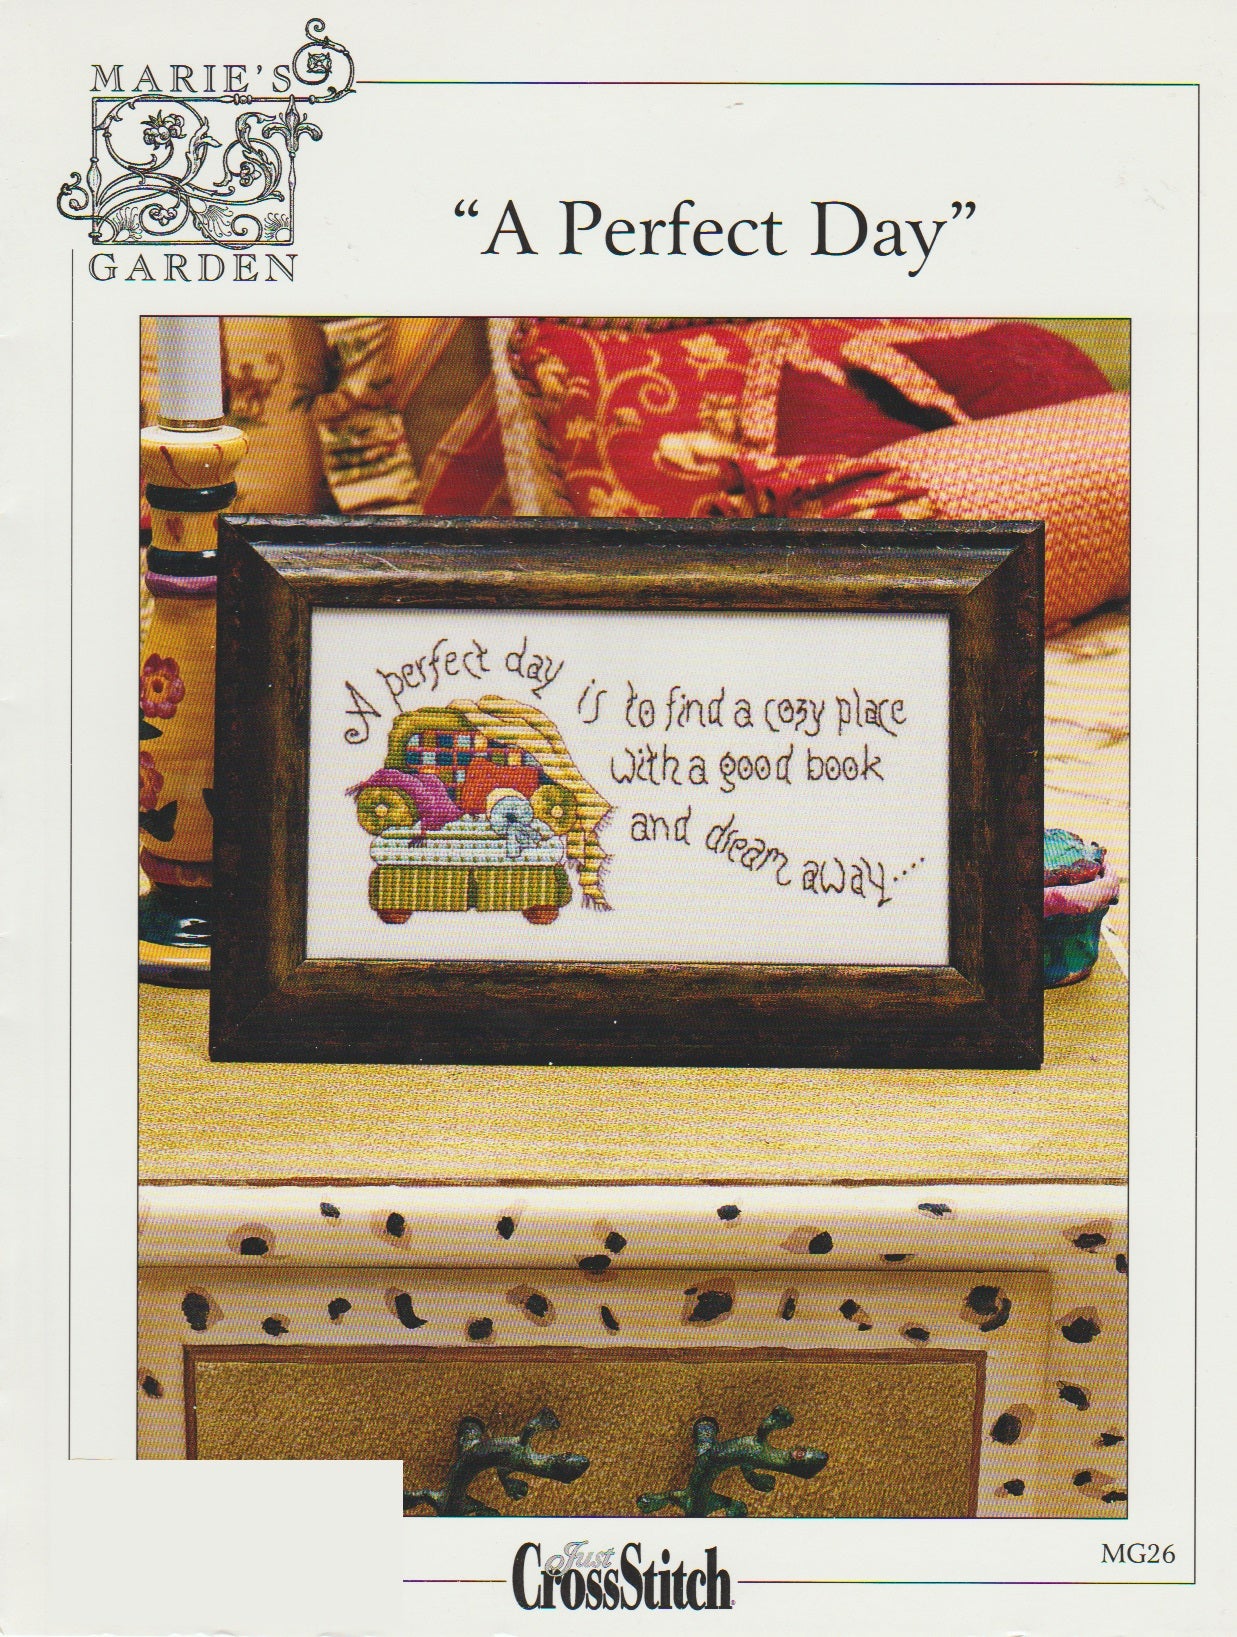 Just CrossStitch Marie's Garden A Perfect Day MG26 cross stitch pattern